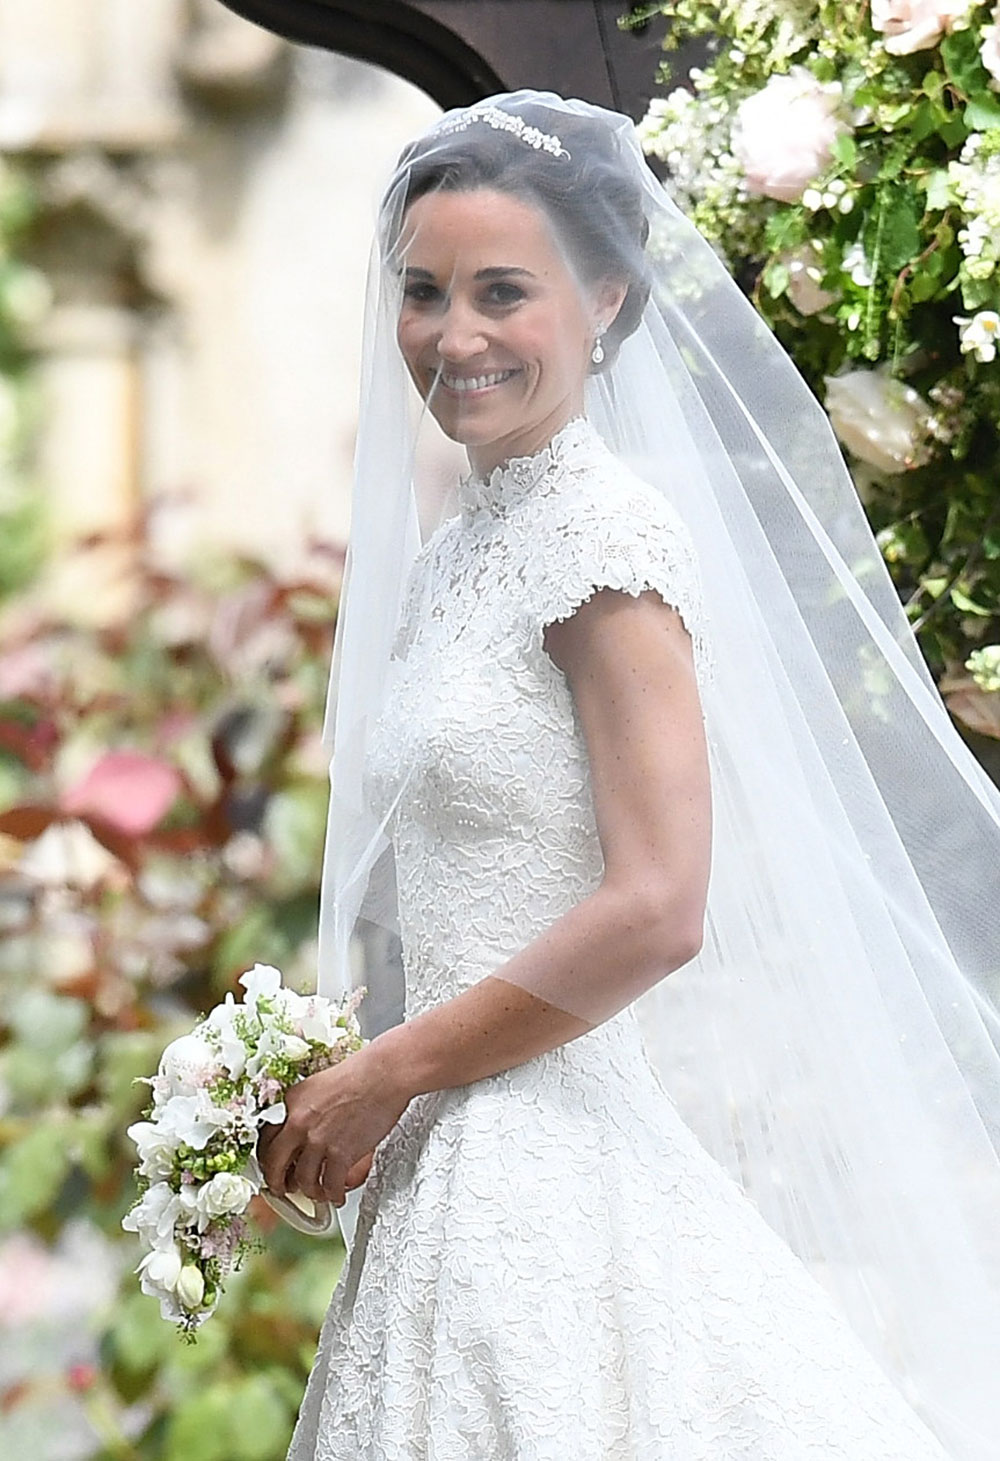 Pippa's wedding dress was designed by Giles Deacon.